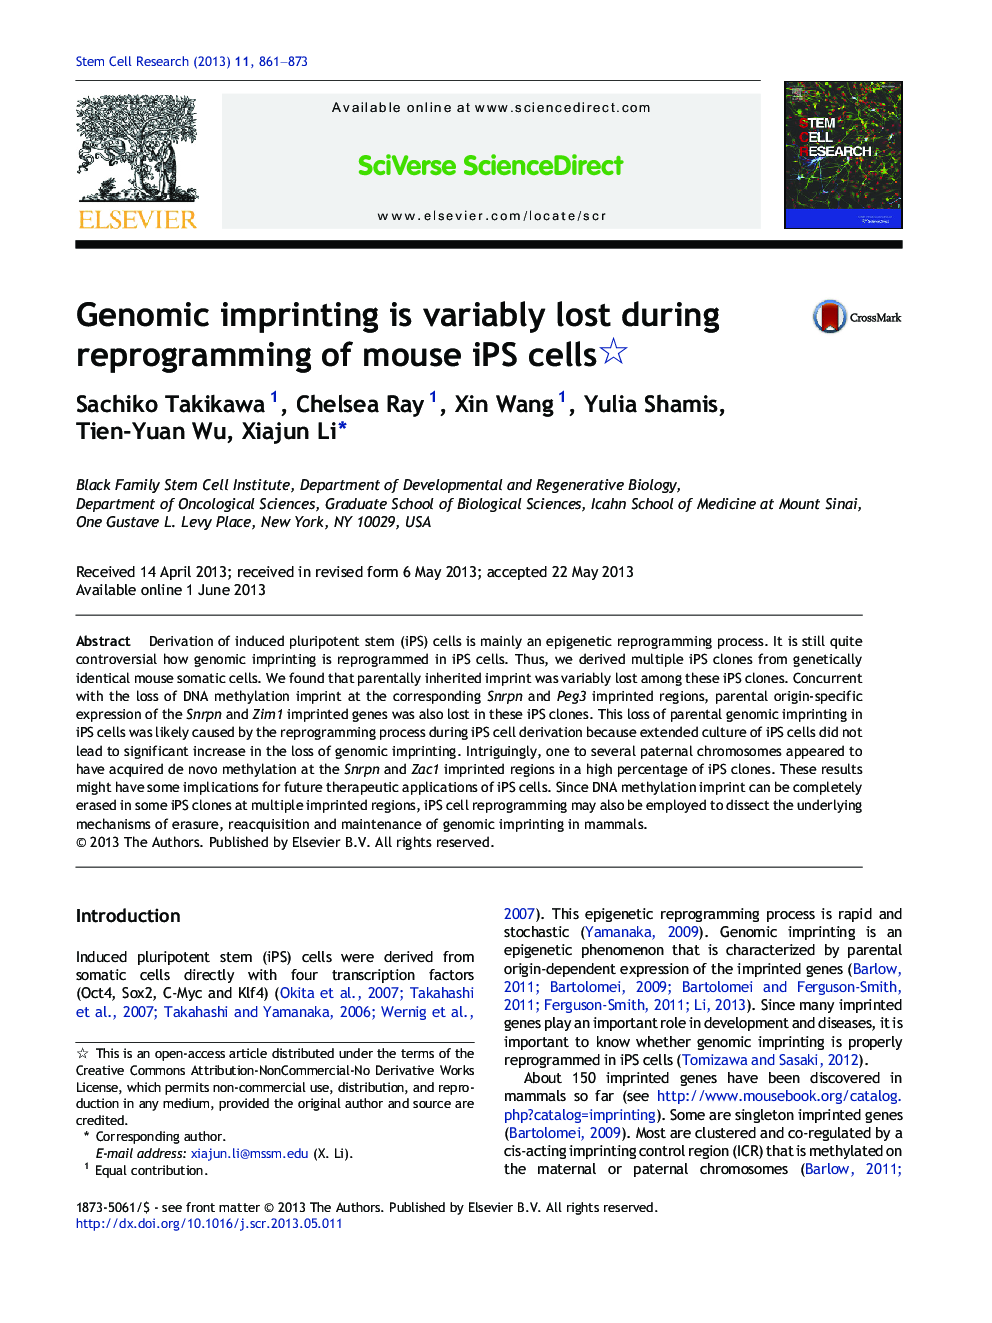 Genomic imprinting is variably lost during reprogramming of mouse iPS cells